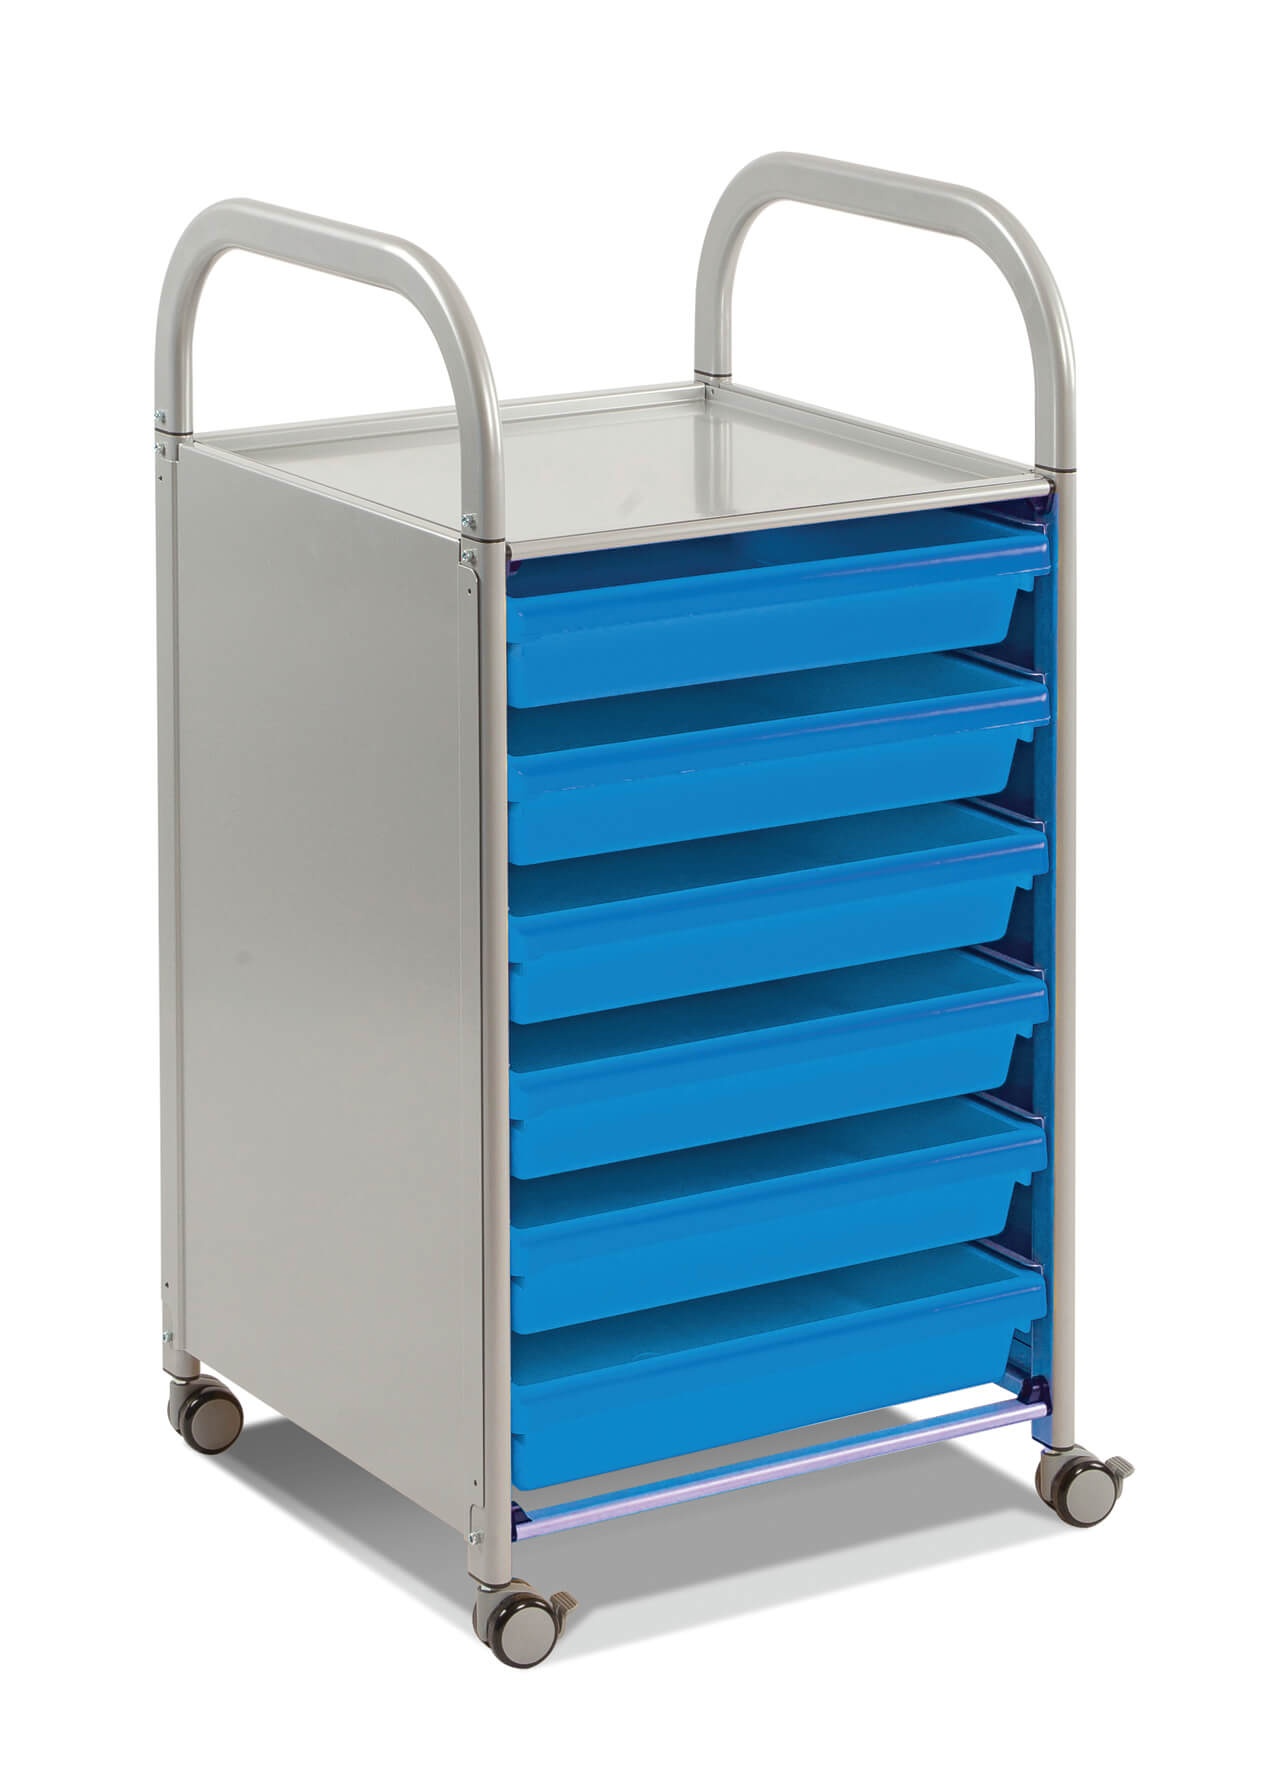 Gratnells Callero A3 Paper Trolley, silver frame and blue trays - H947 x W500 x D500